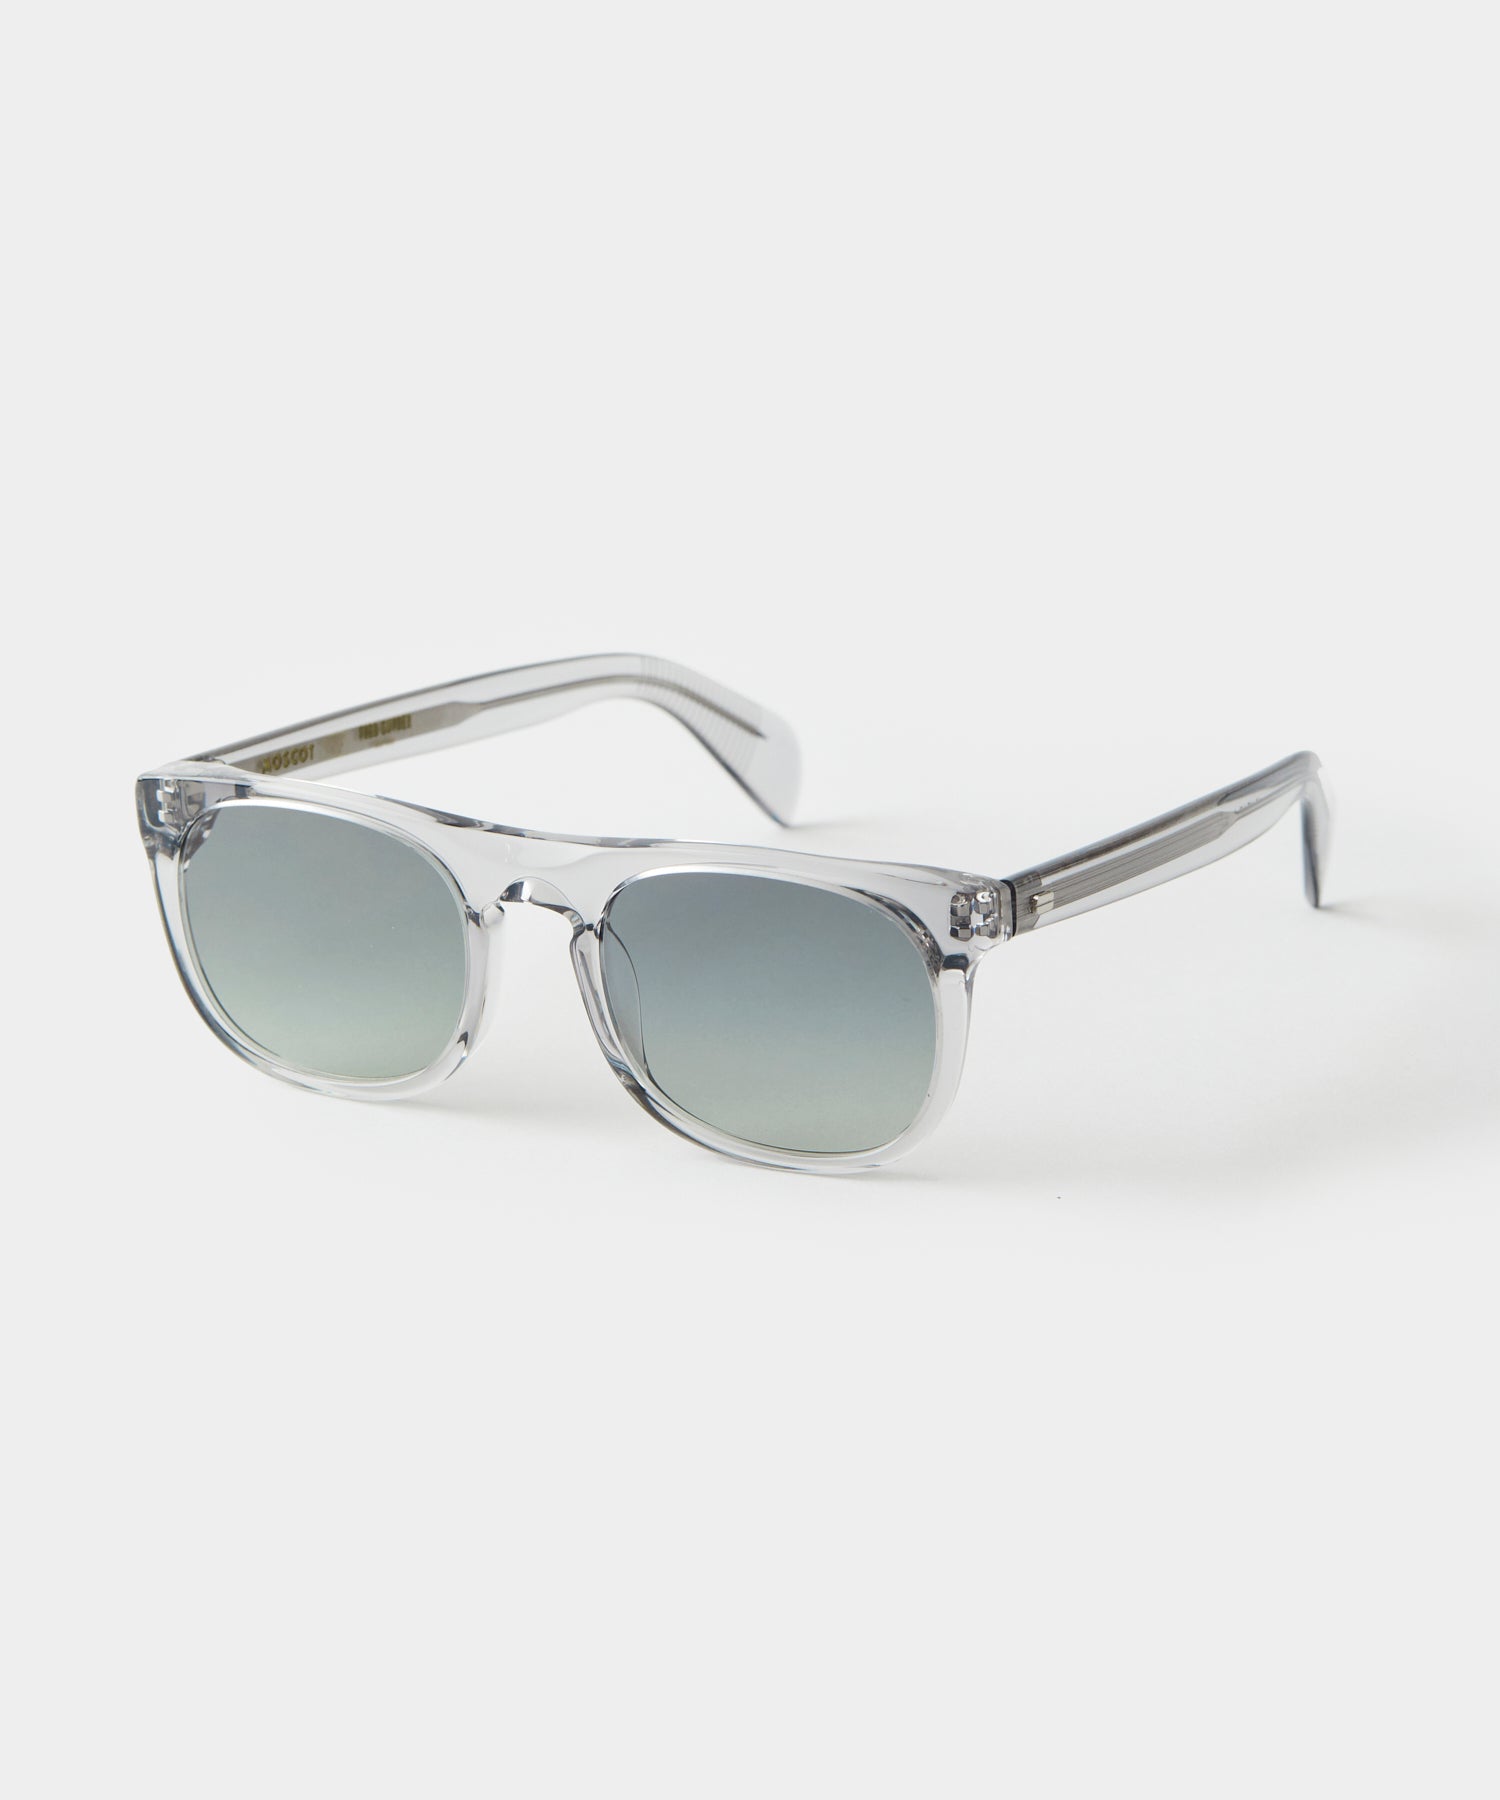 Todd Snyder x Moscot 10 Year Anniversary Edition - The Nomad in Light Grey